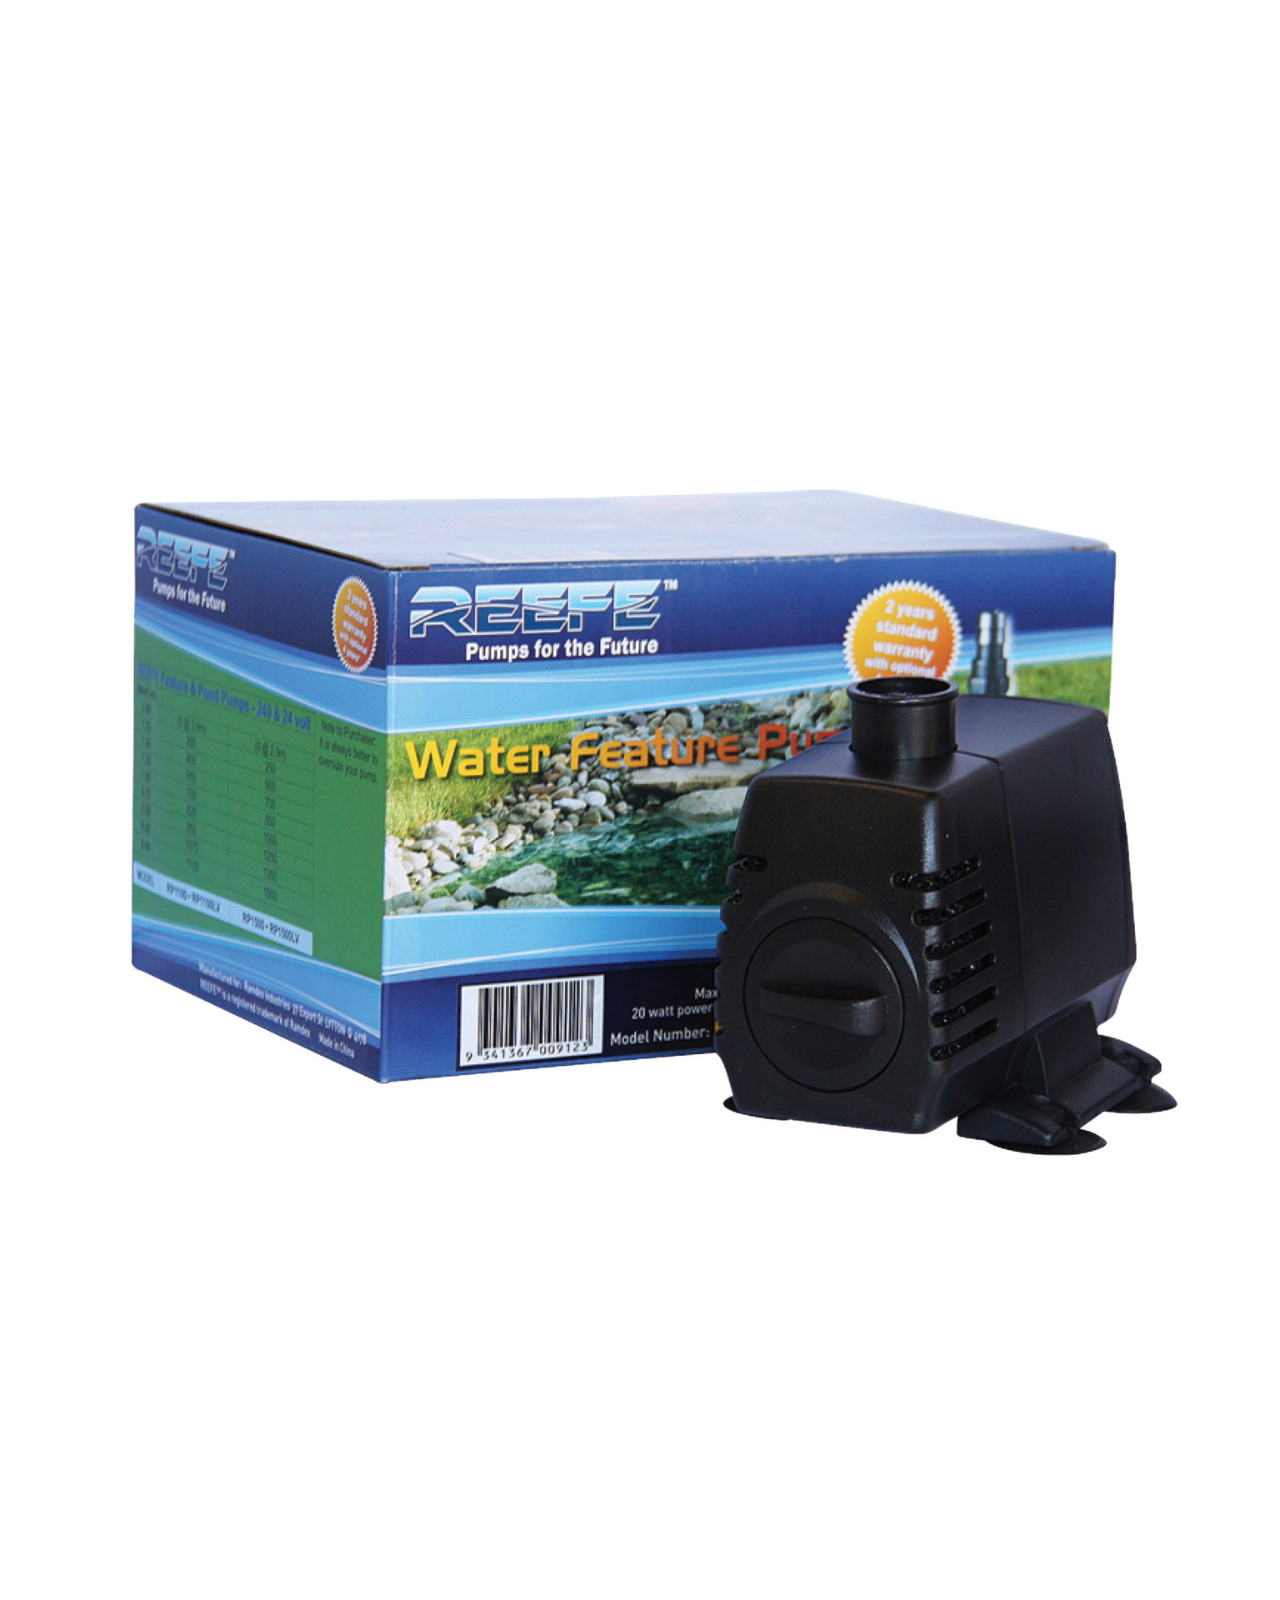 RP1100LV Pond & Water Feature Pump 24V